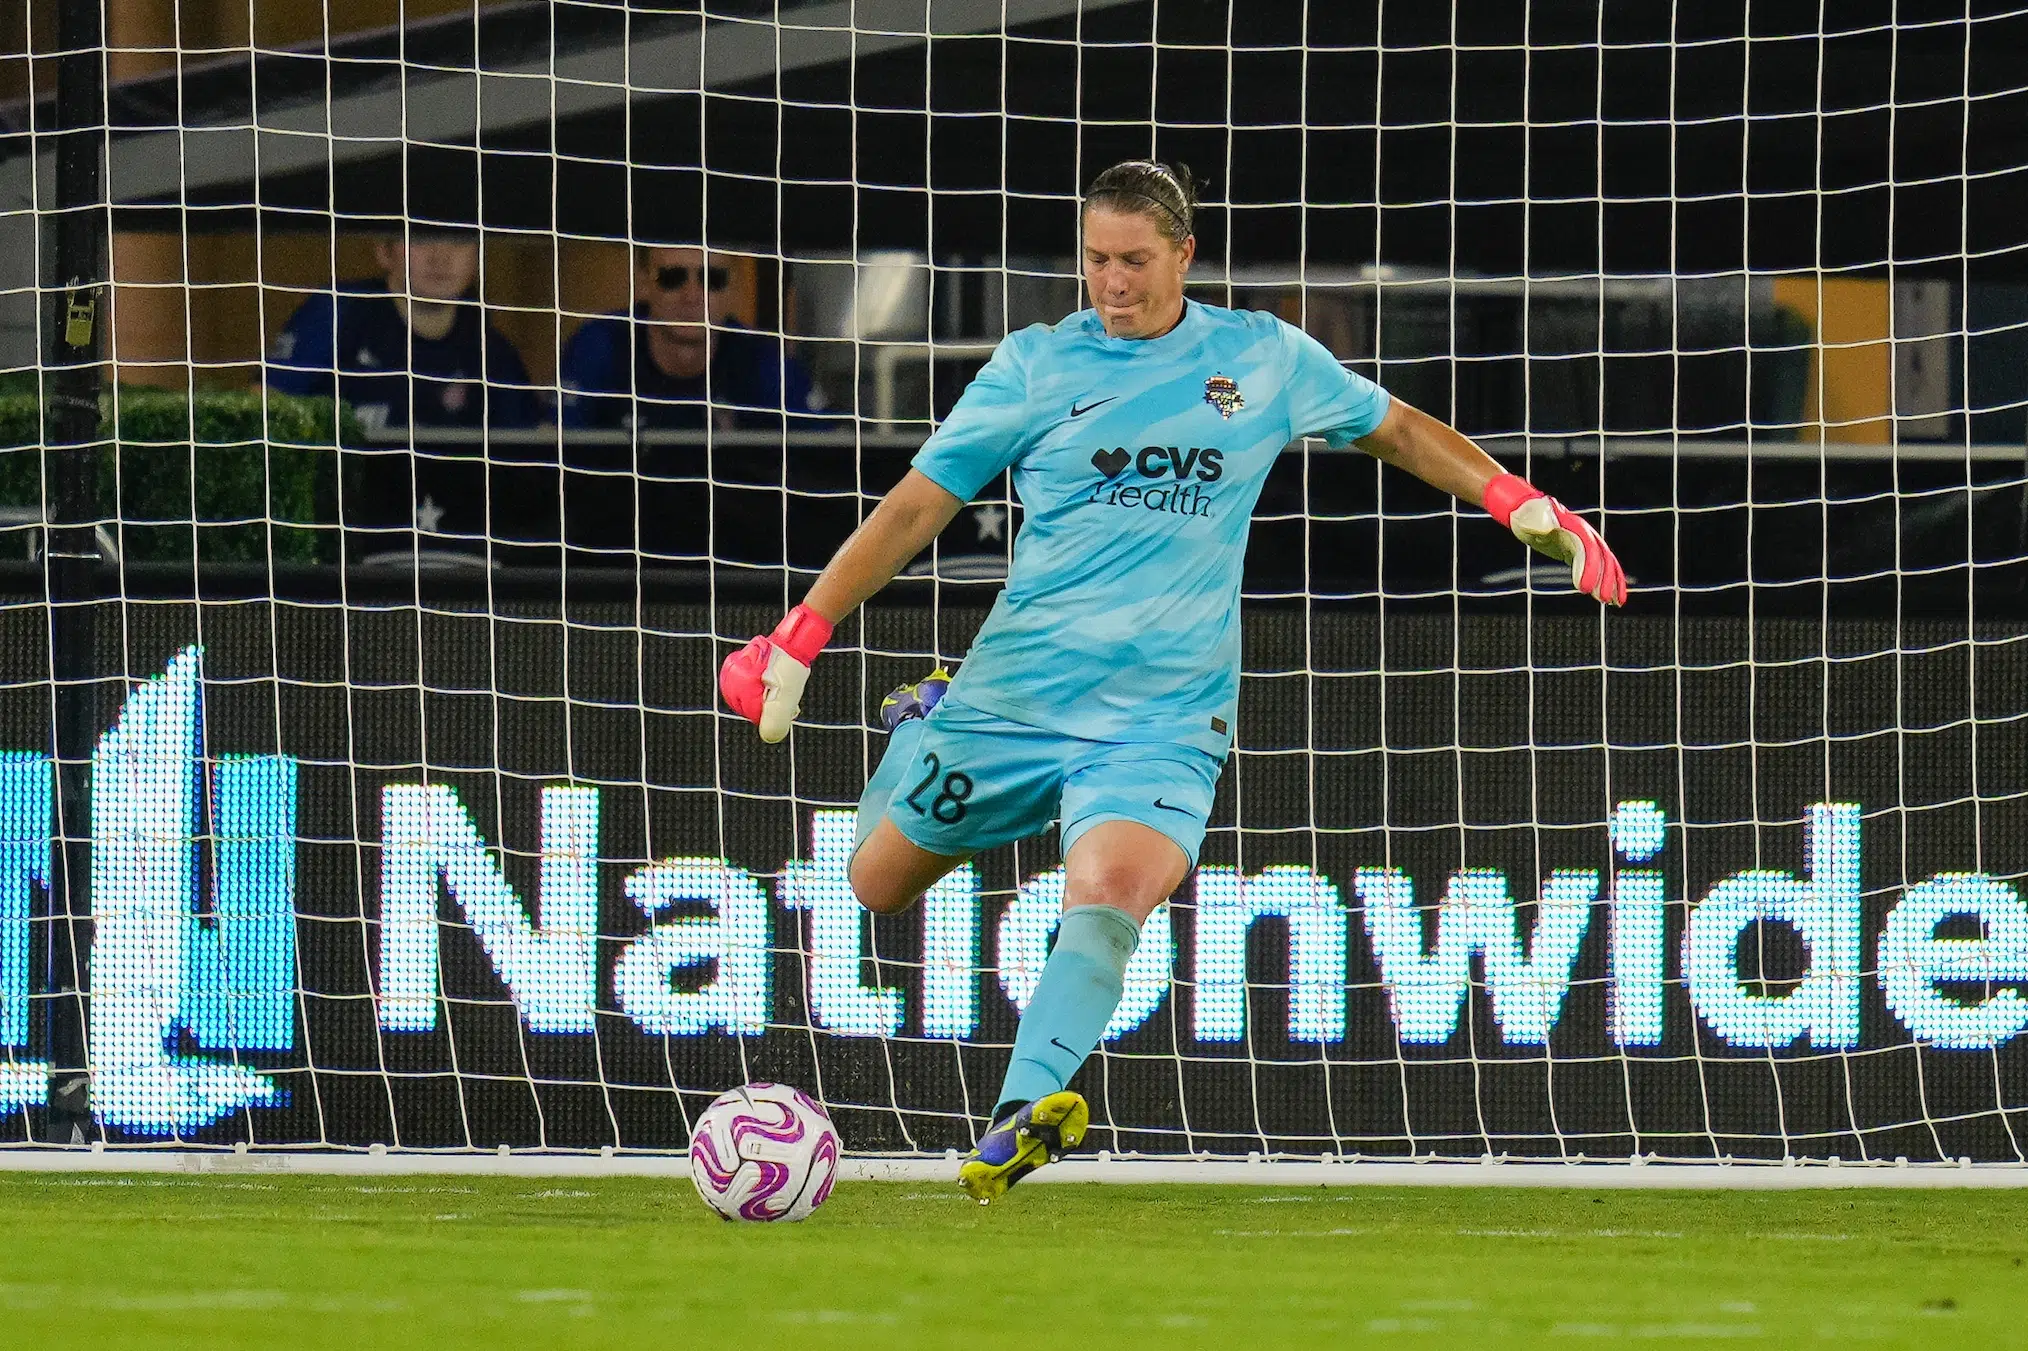 A goalie in a blue uniform winds up to kick a soccer ball. The net is visible in the background.